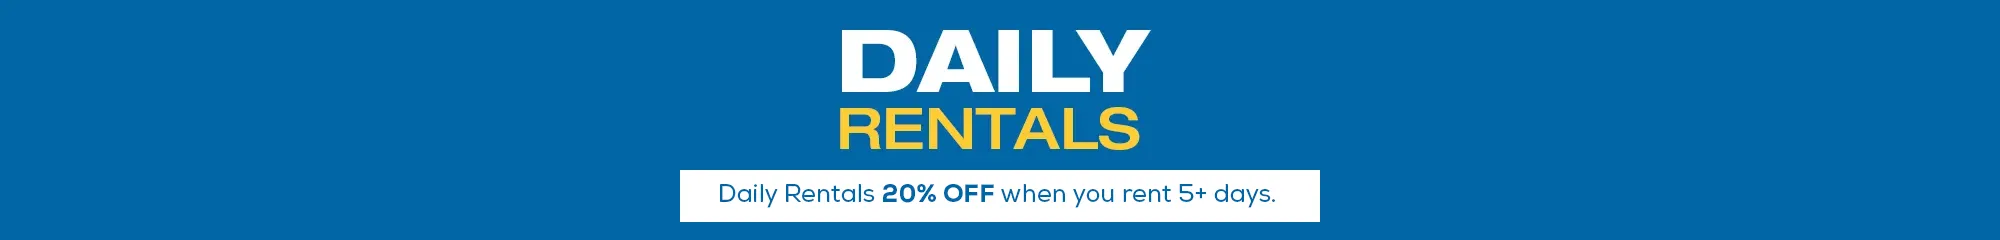 Daily Rentals 20% OFF